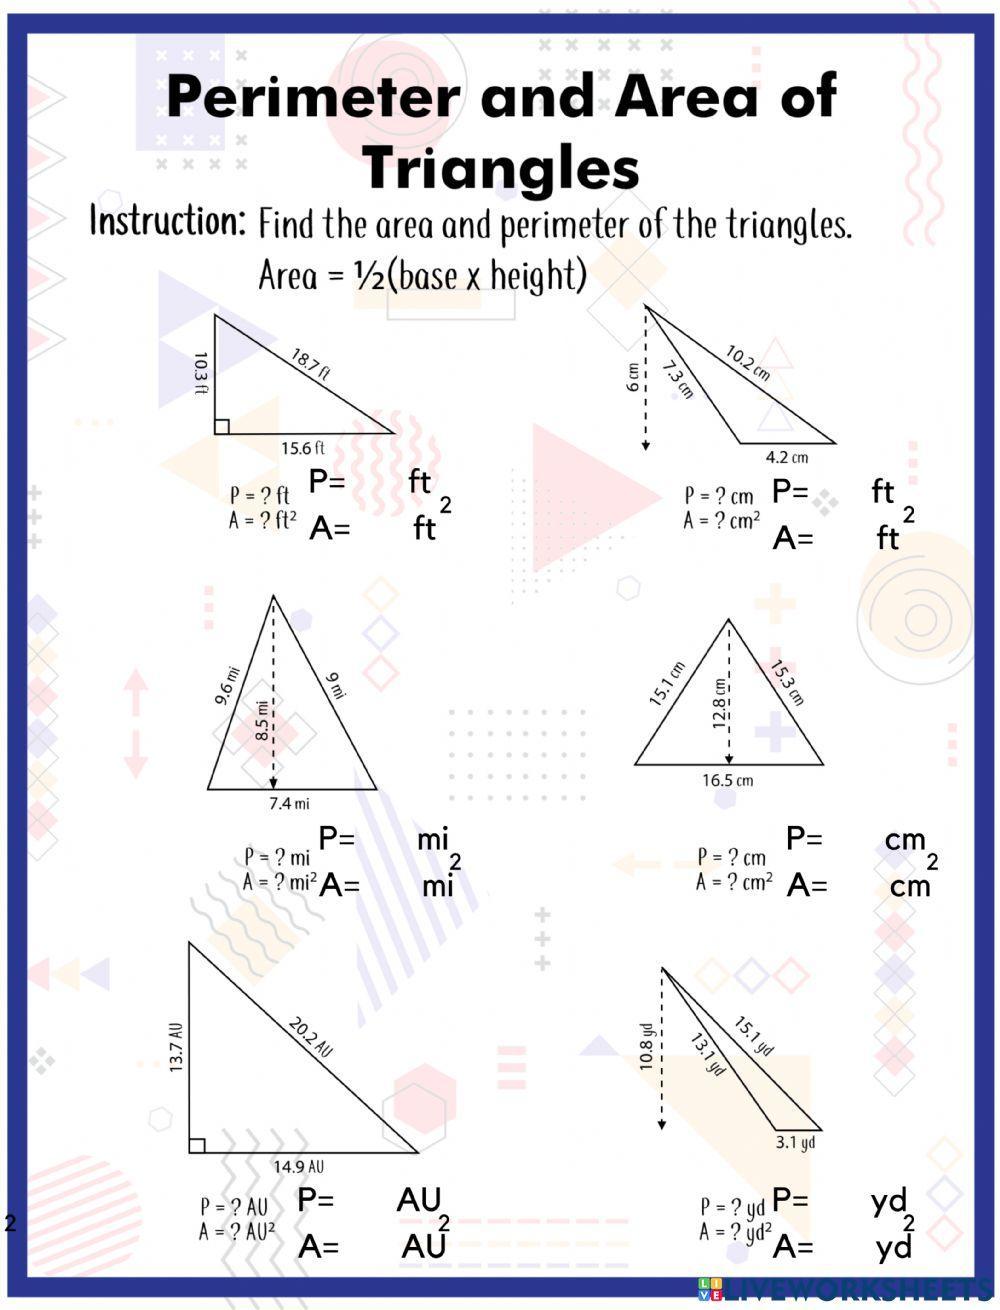 Perimeter and Area of Triangles